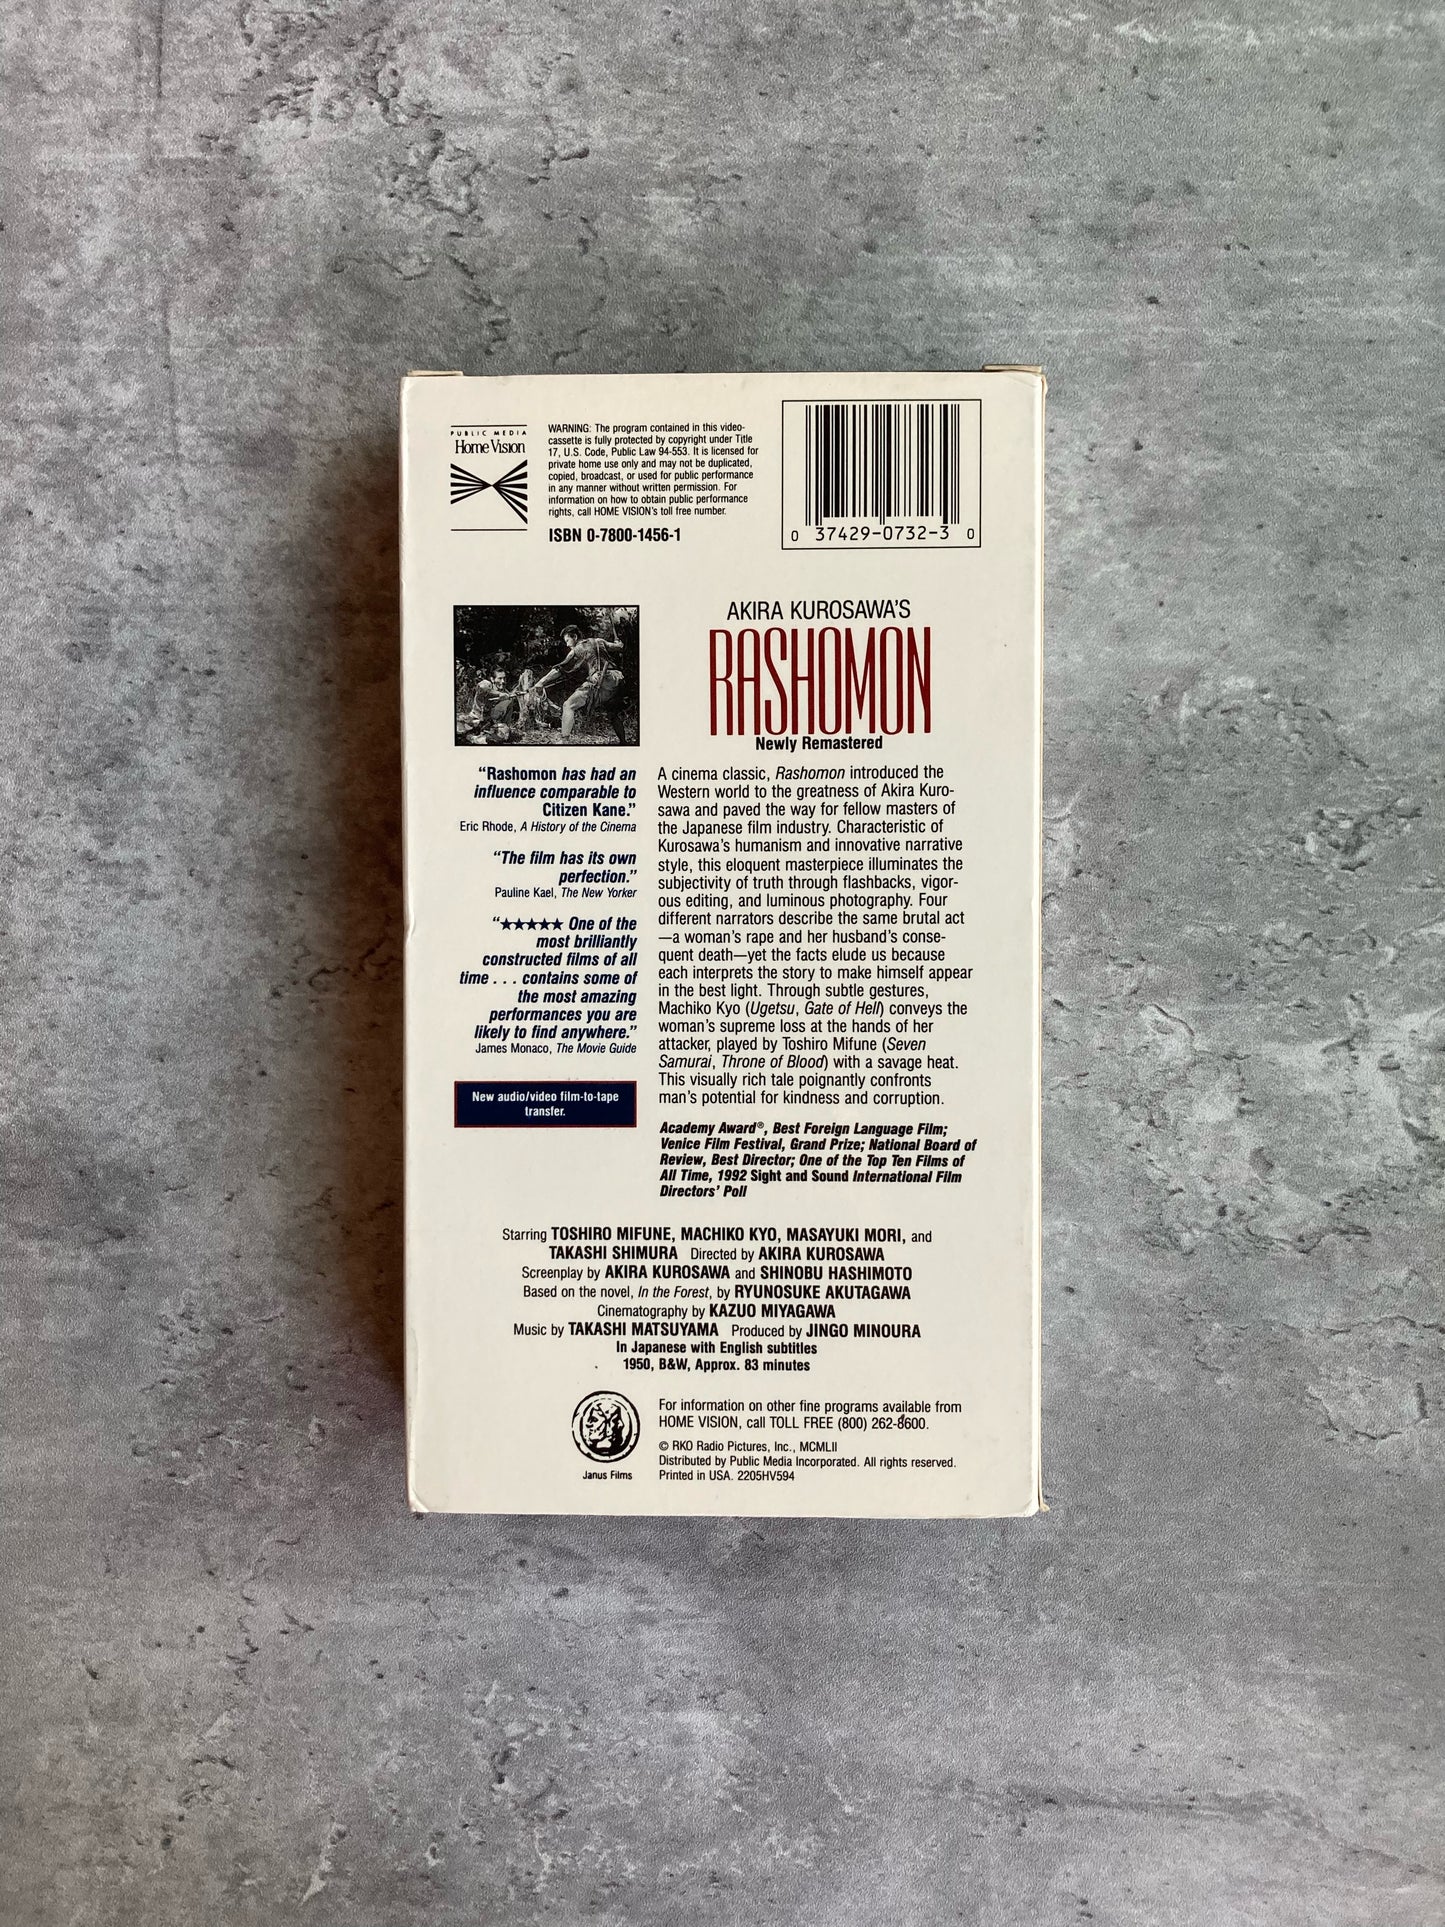 Cover of Rashomon movie by Akira Kurosawa. Shop for film and VHS with The Stone Circle, the only online bookstore near you.